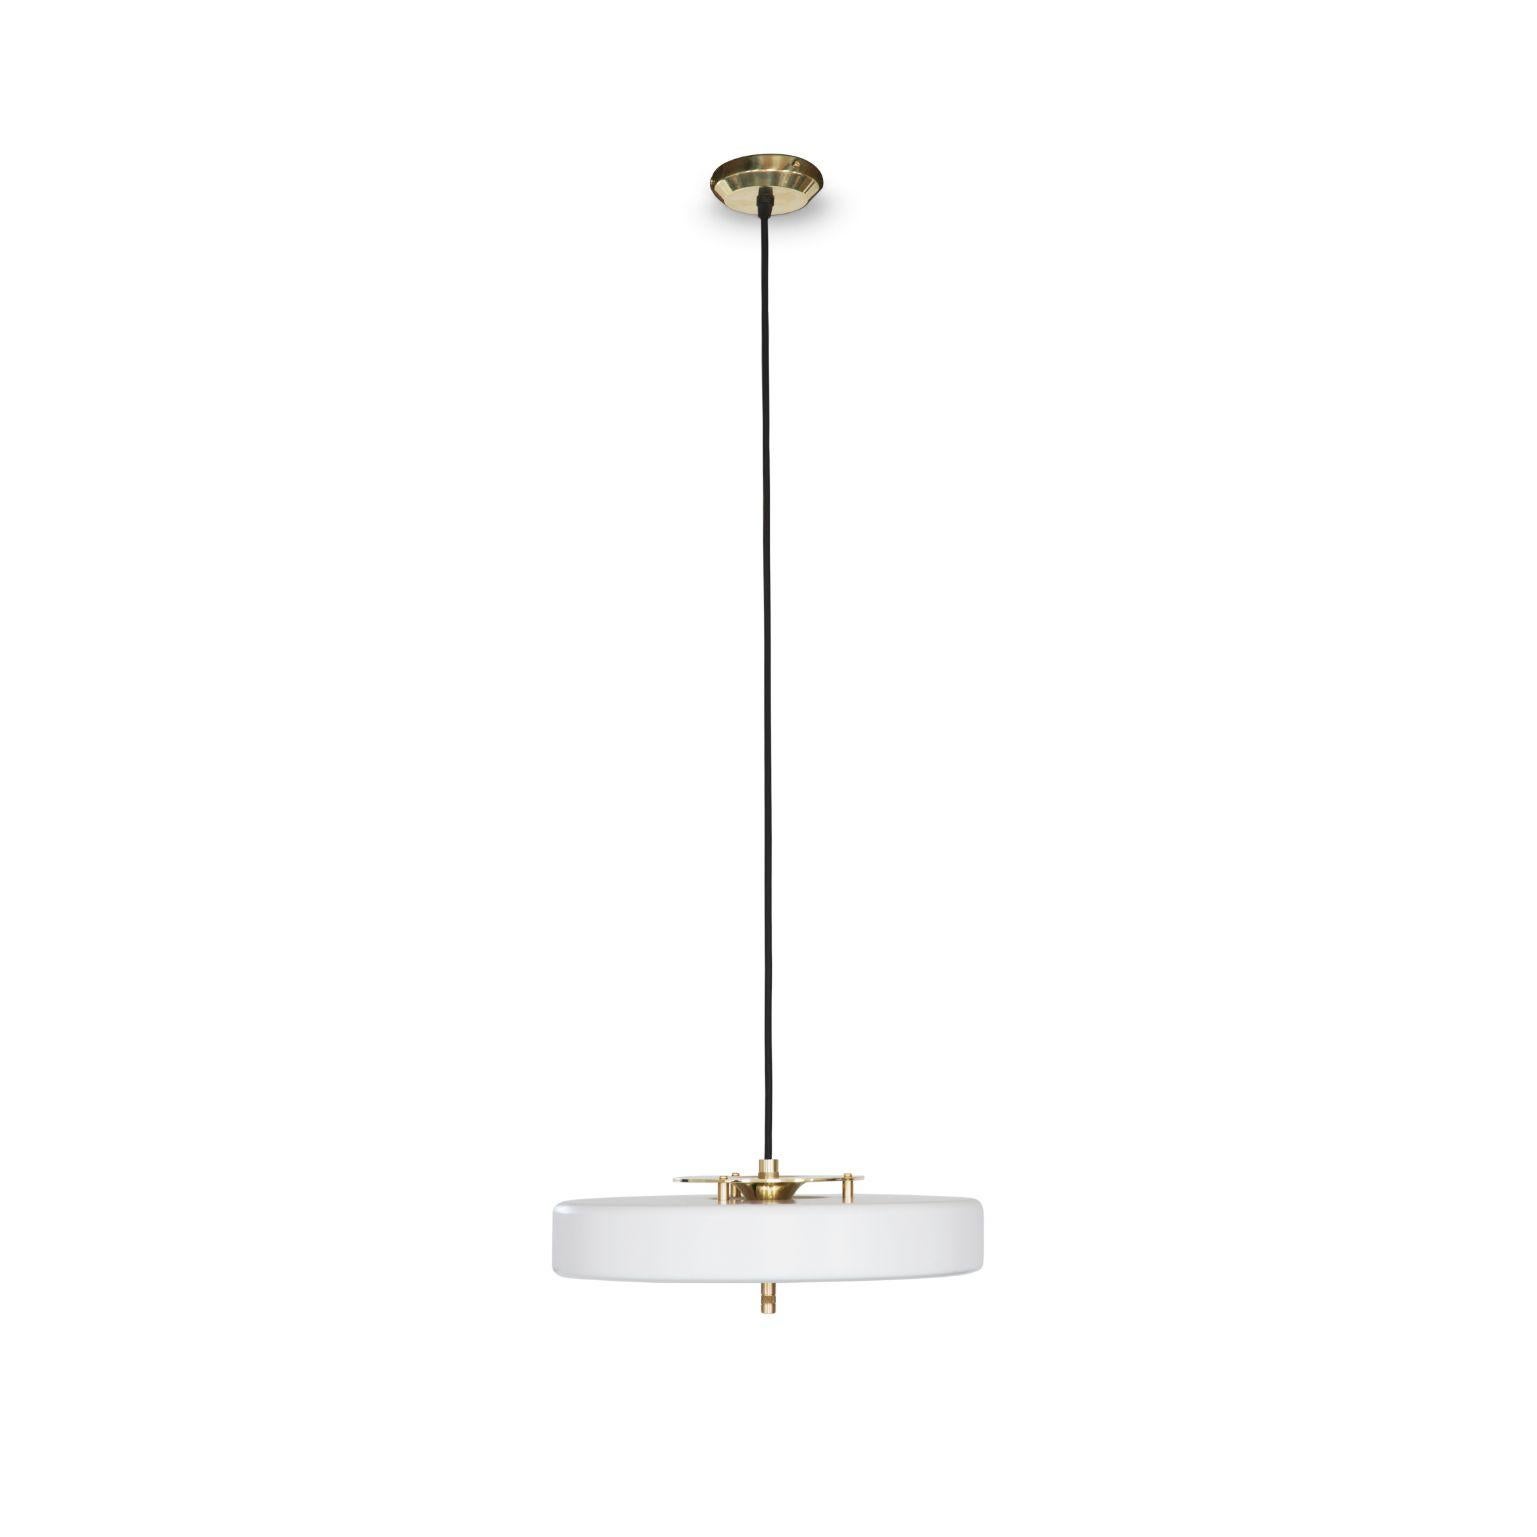 Revolve pendant light - brushed brass - white by Bert Frank
Dimensions: 60-200 x 35 x 11 cm
Materials: Brass, steel

Also available in polished brass

When Adam Yeats and Robbie Llewellyn founded Bert Frank in 2013 it was a meeting of minds